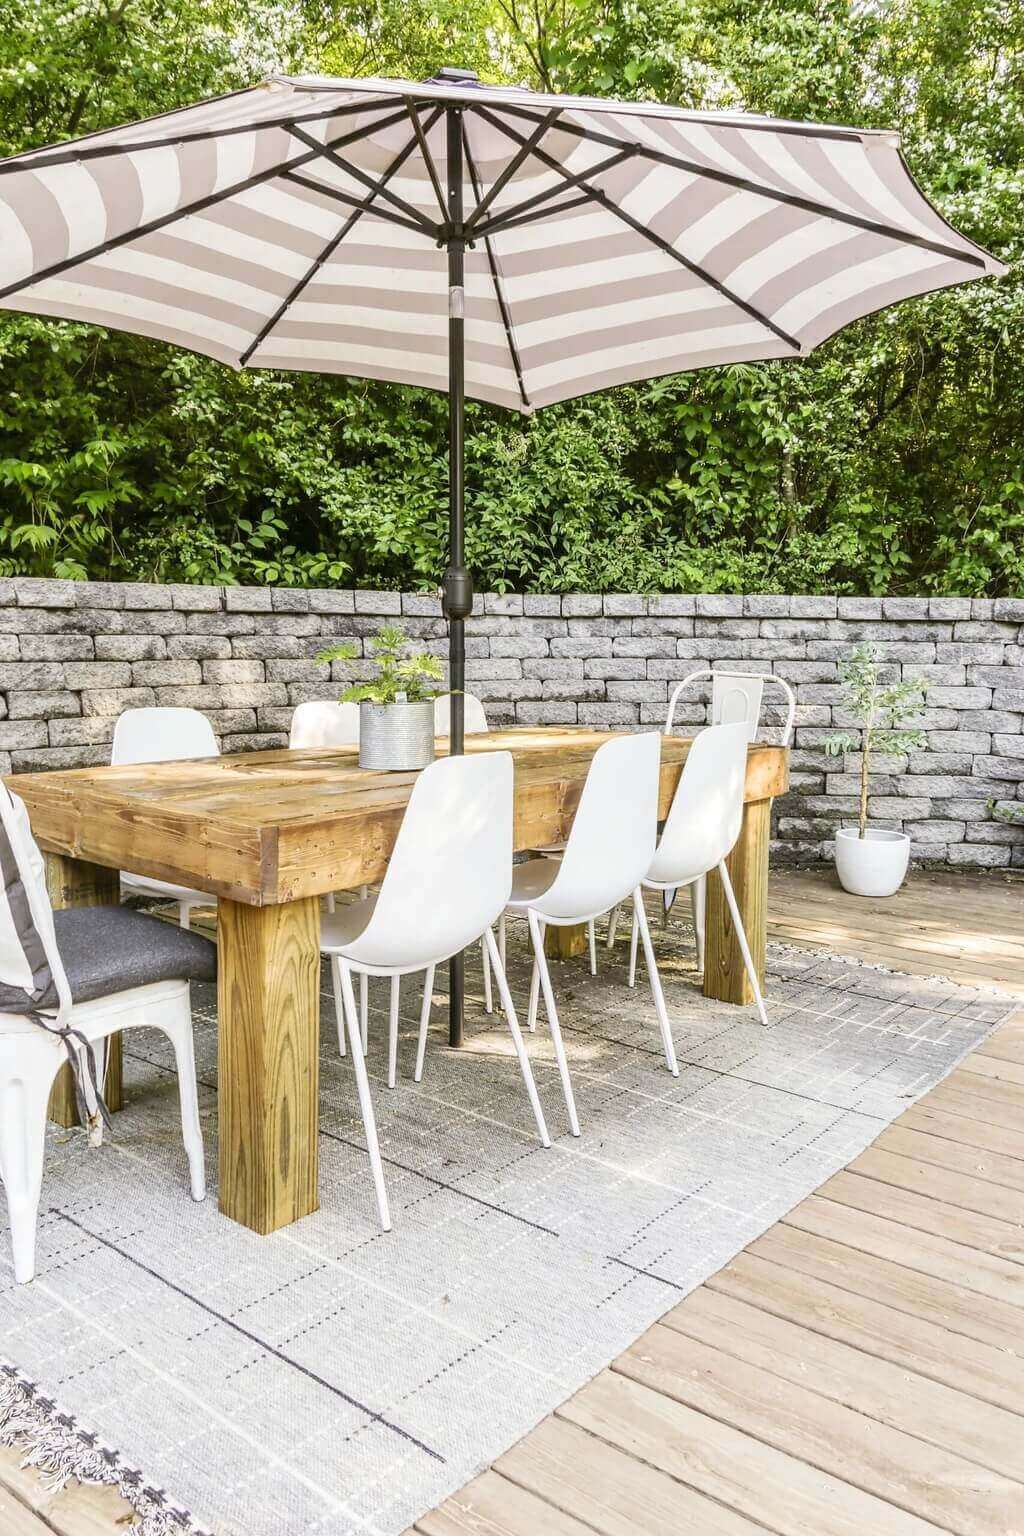 Outdoor Dining Area With Umbrella